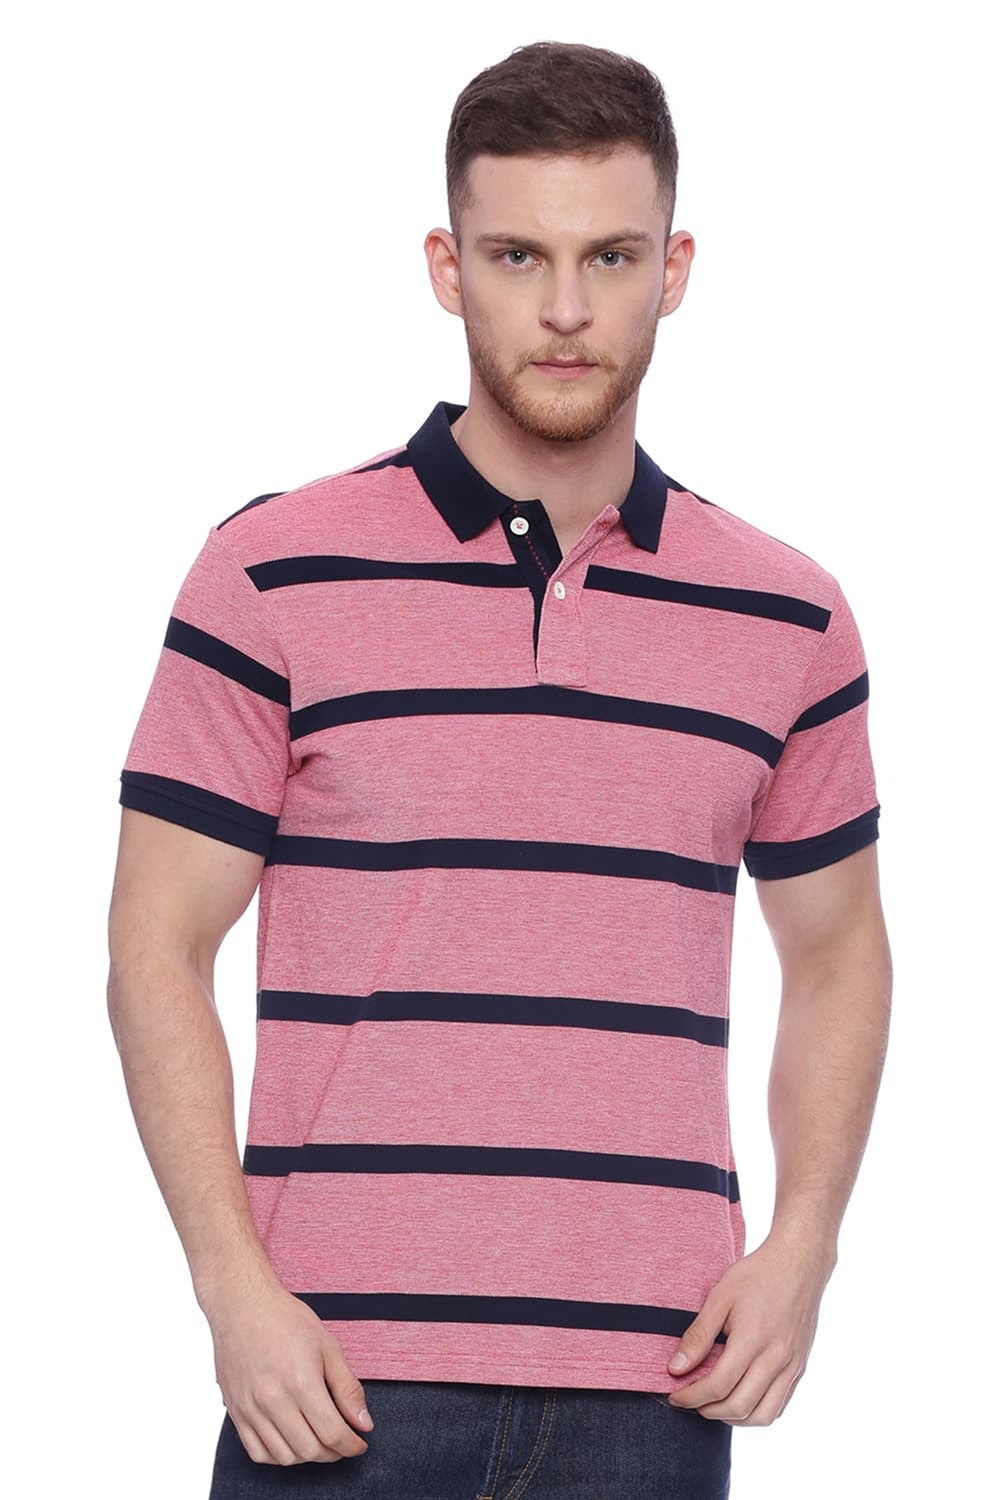 Basics | Basics Muscle Fit Chambray Red Striped Rugby Polo T Shirt